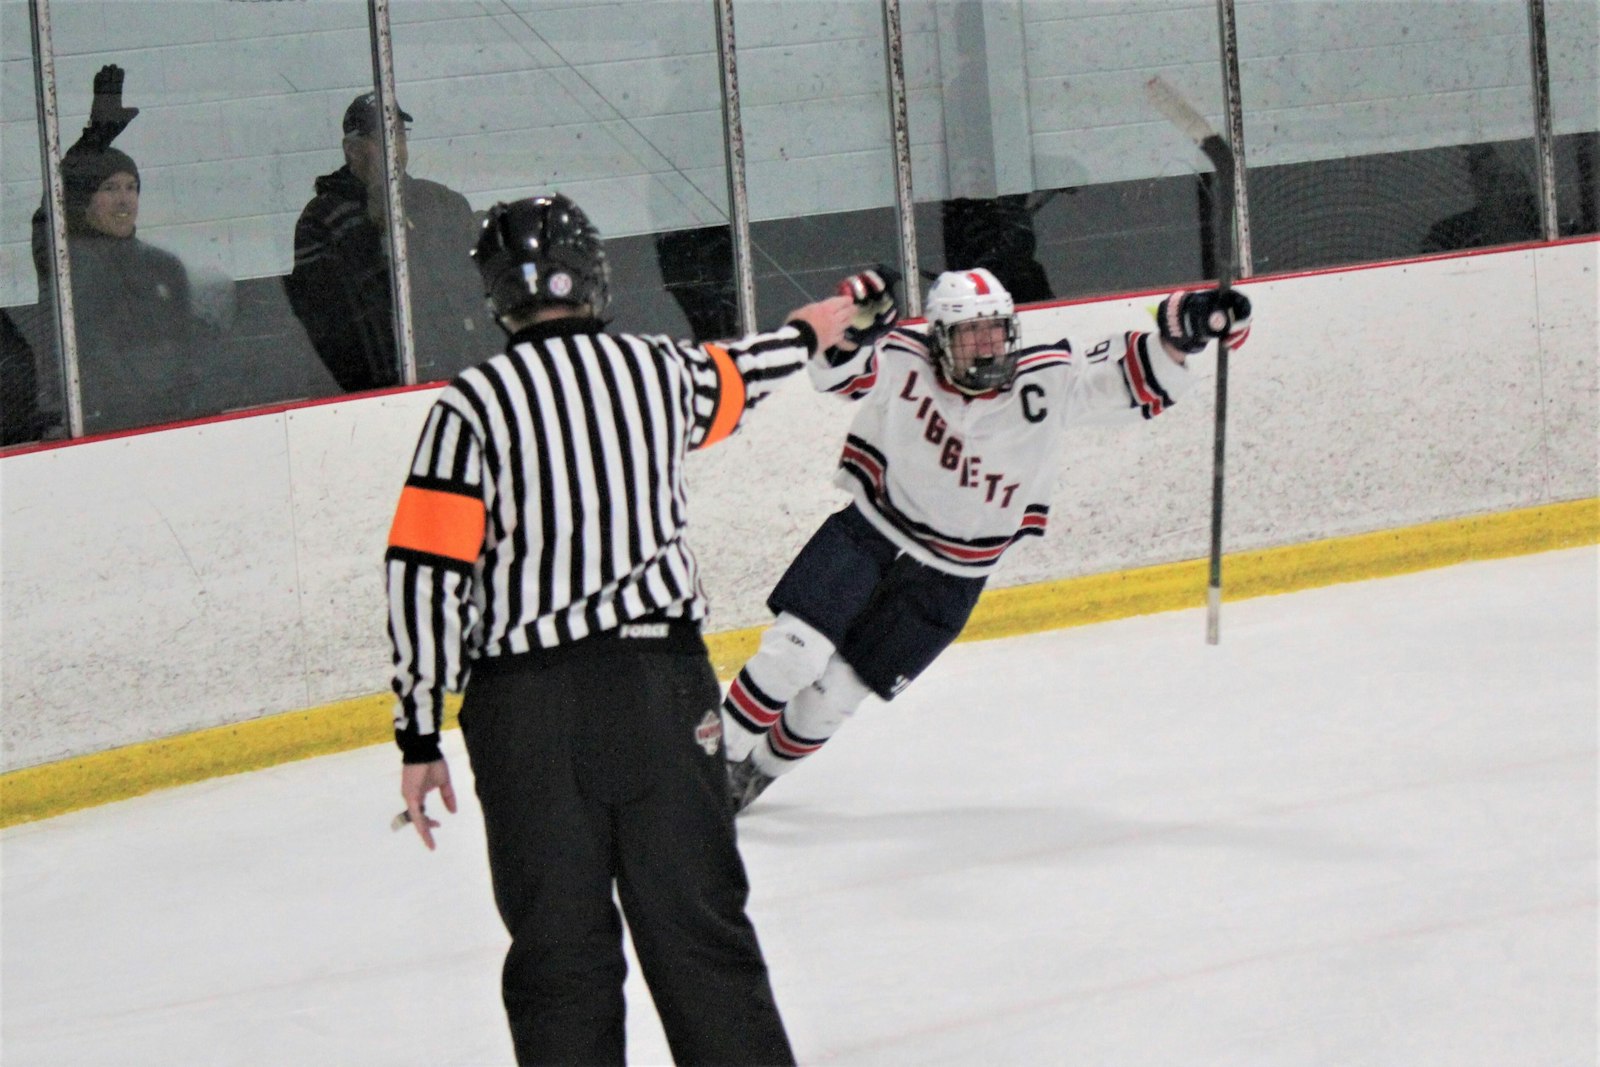 As the referee gives the ‘goal’ signal, University-Liggett senior forward Doug Wood celebrates his overtime game-winner which gave the Knights the Catholic League’s Cardinal Division title.